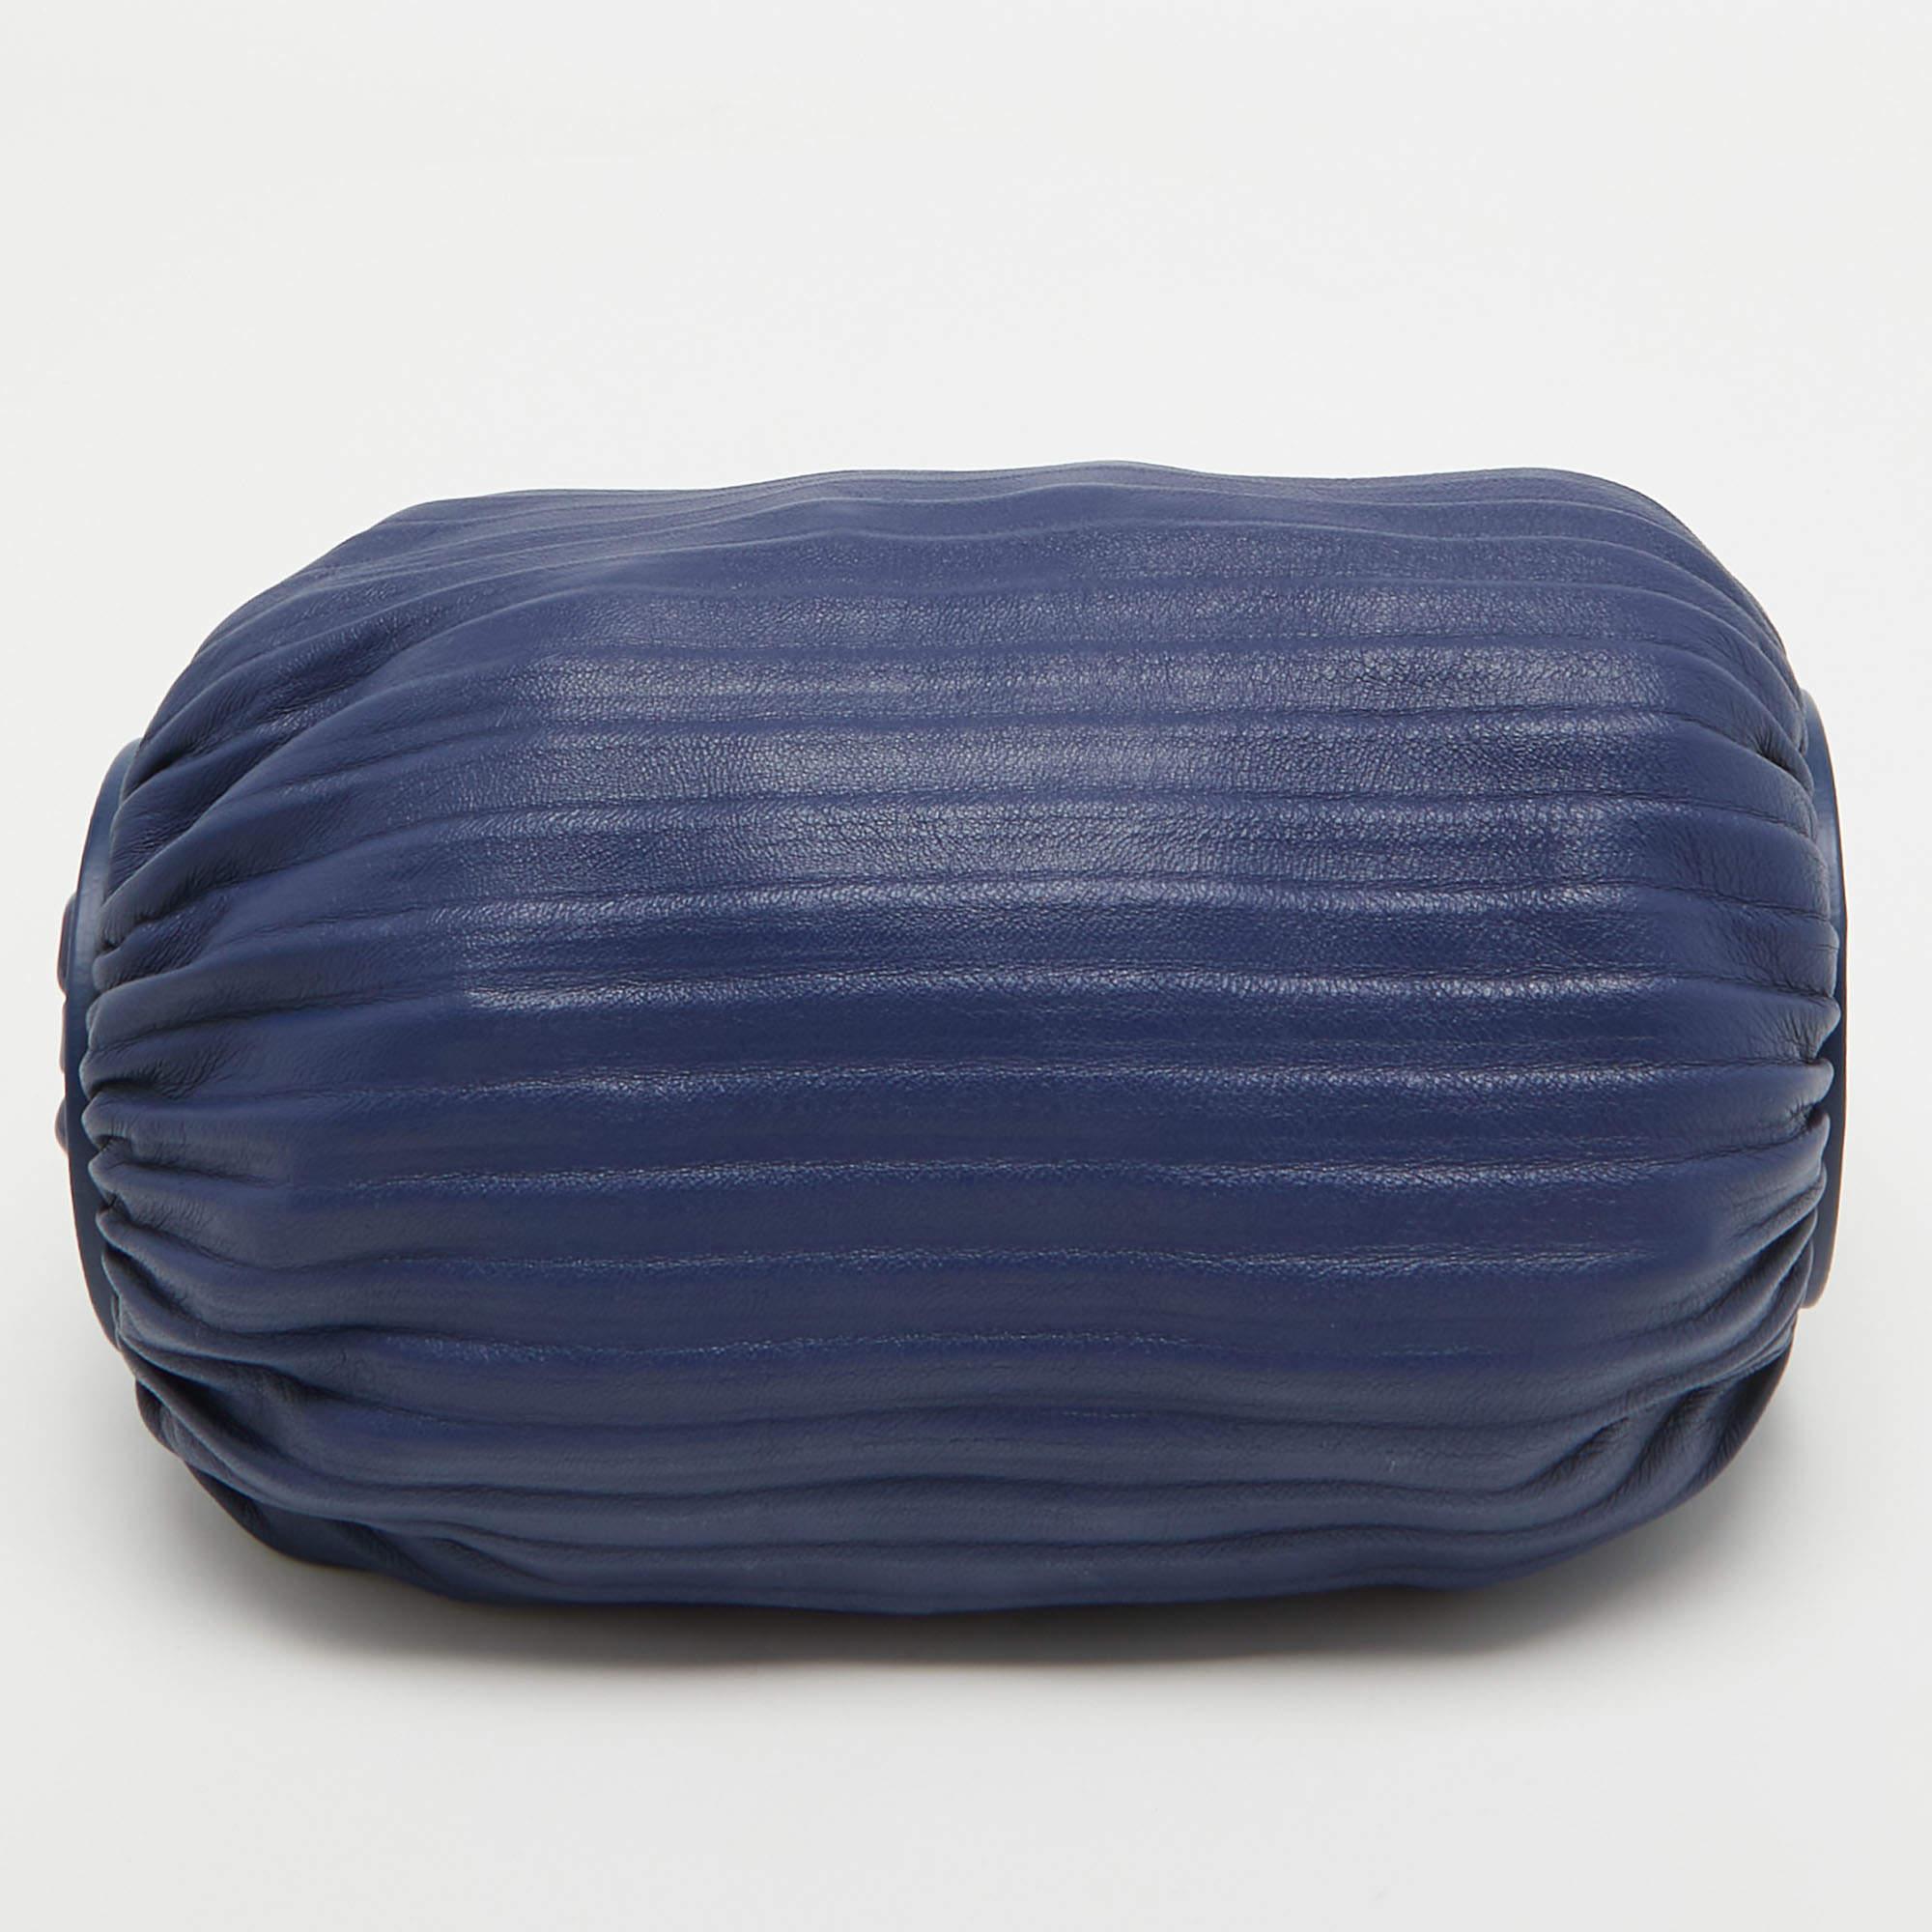 Loewe Blue Leather Pleated Bracelet Pouch Bag For Sale 4